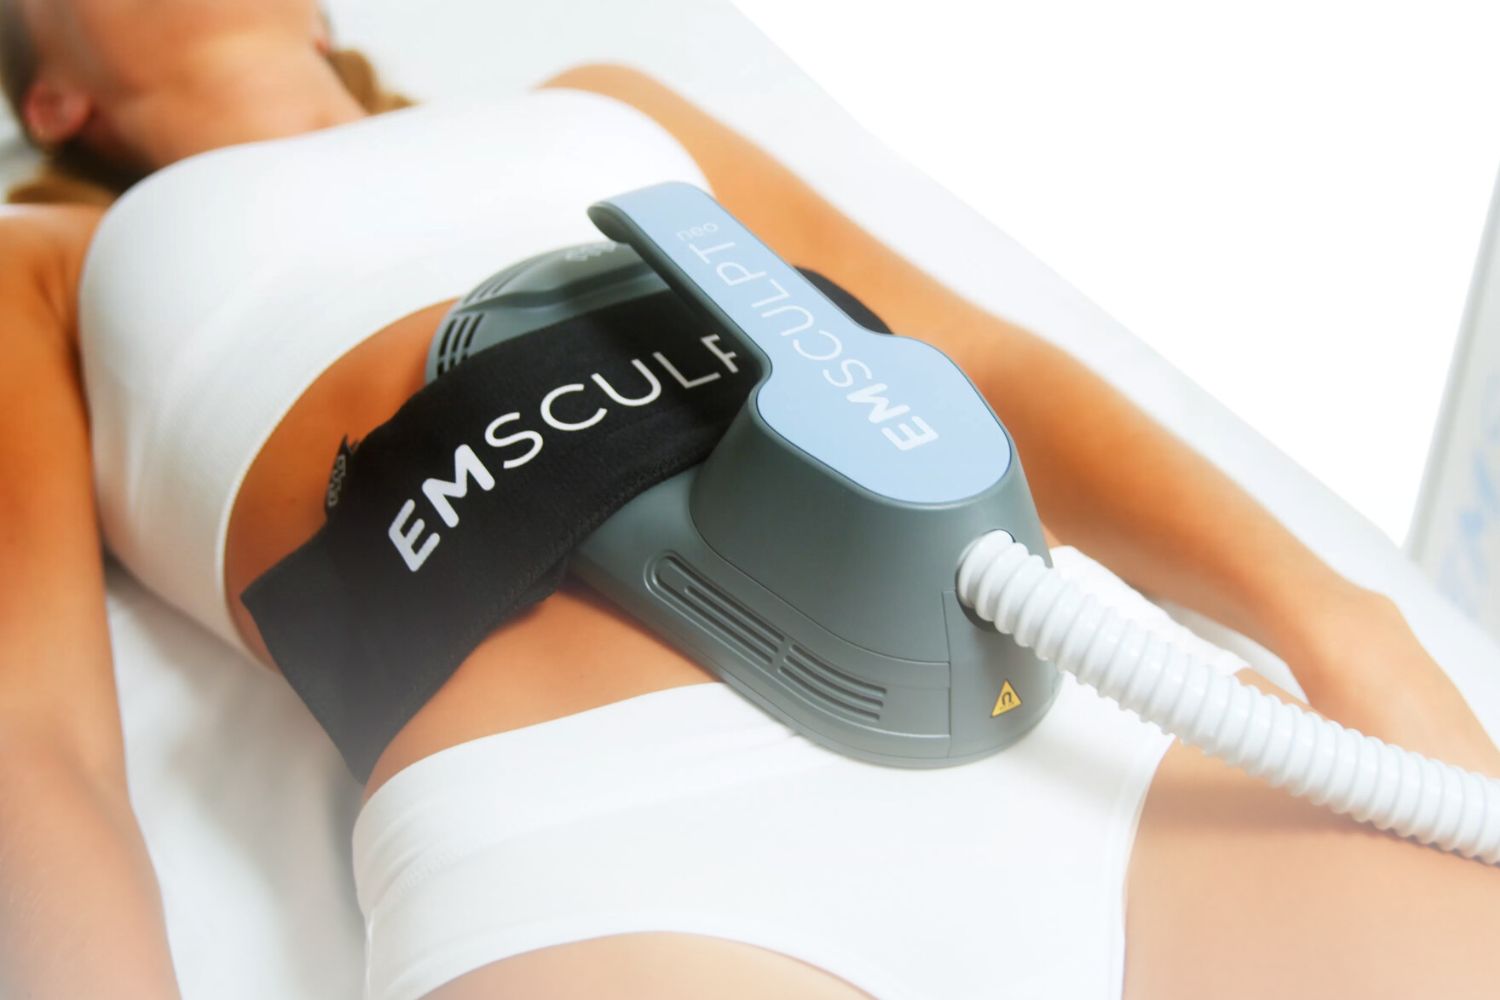 Feel Confident This Summer with Emsculpt Body Contouring